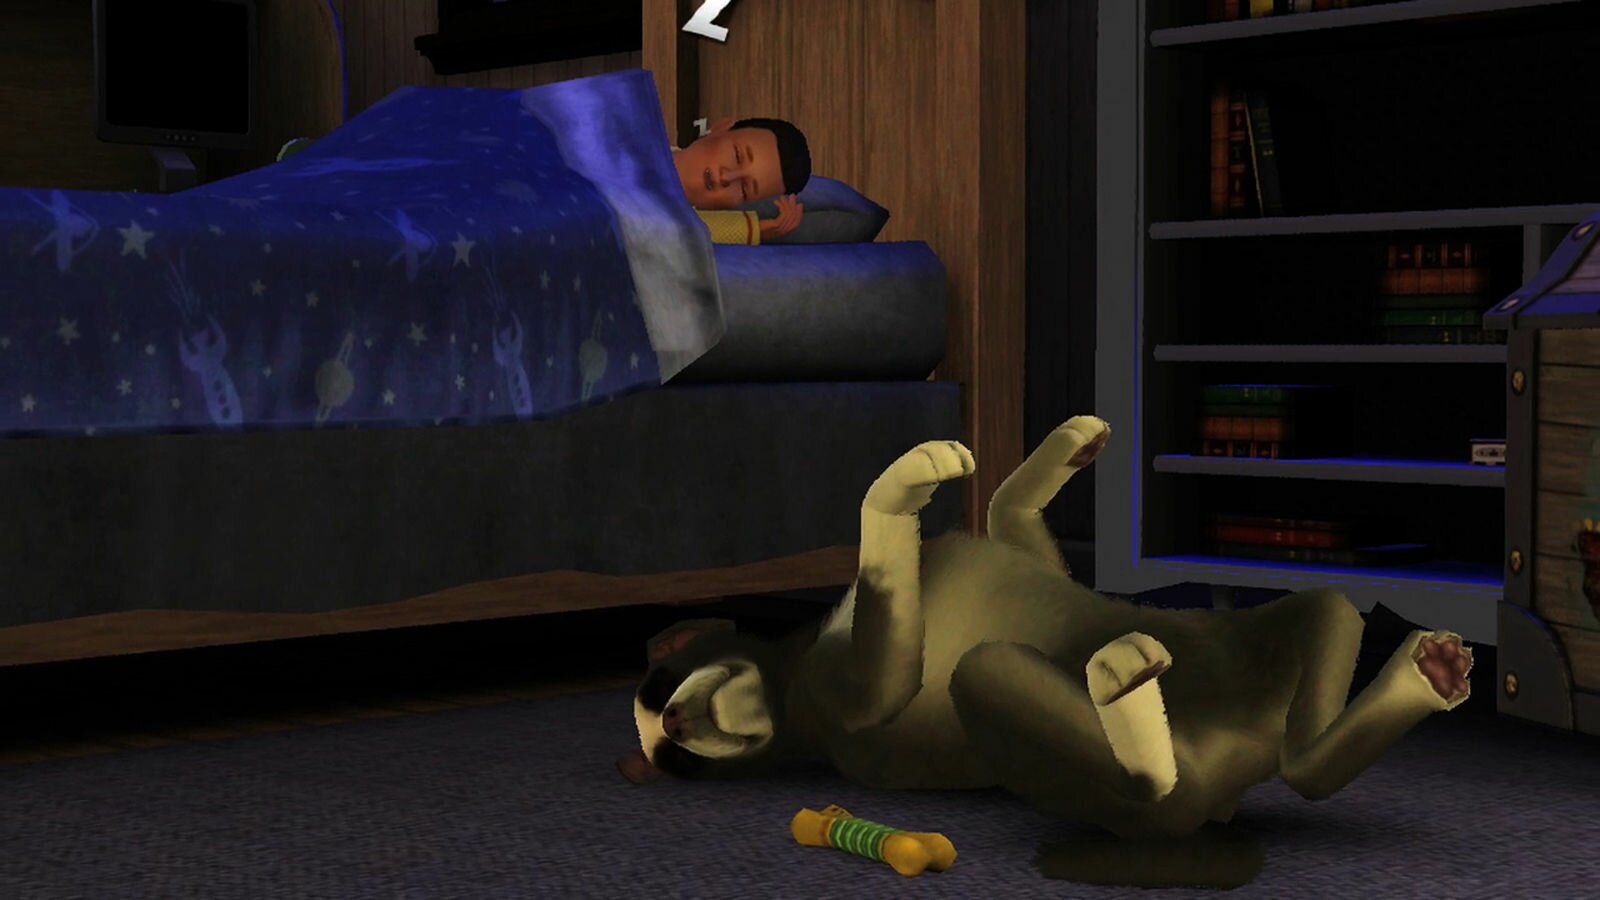 The Sims 3 - Pets